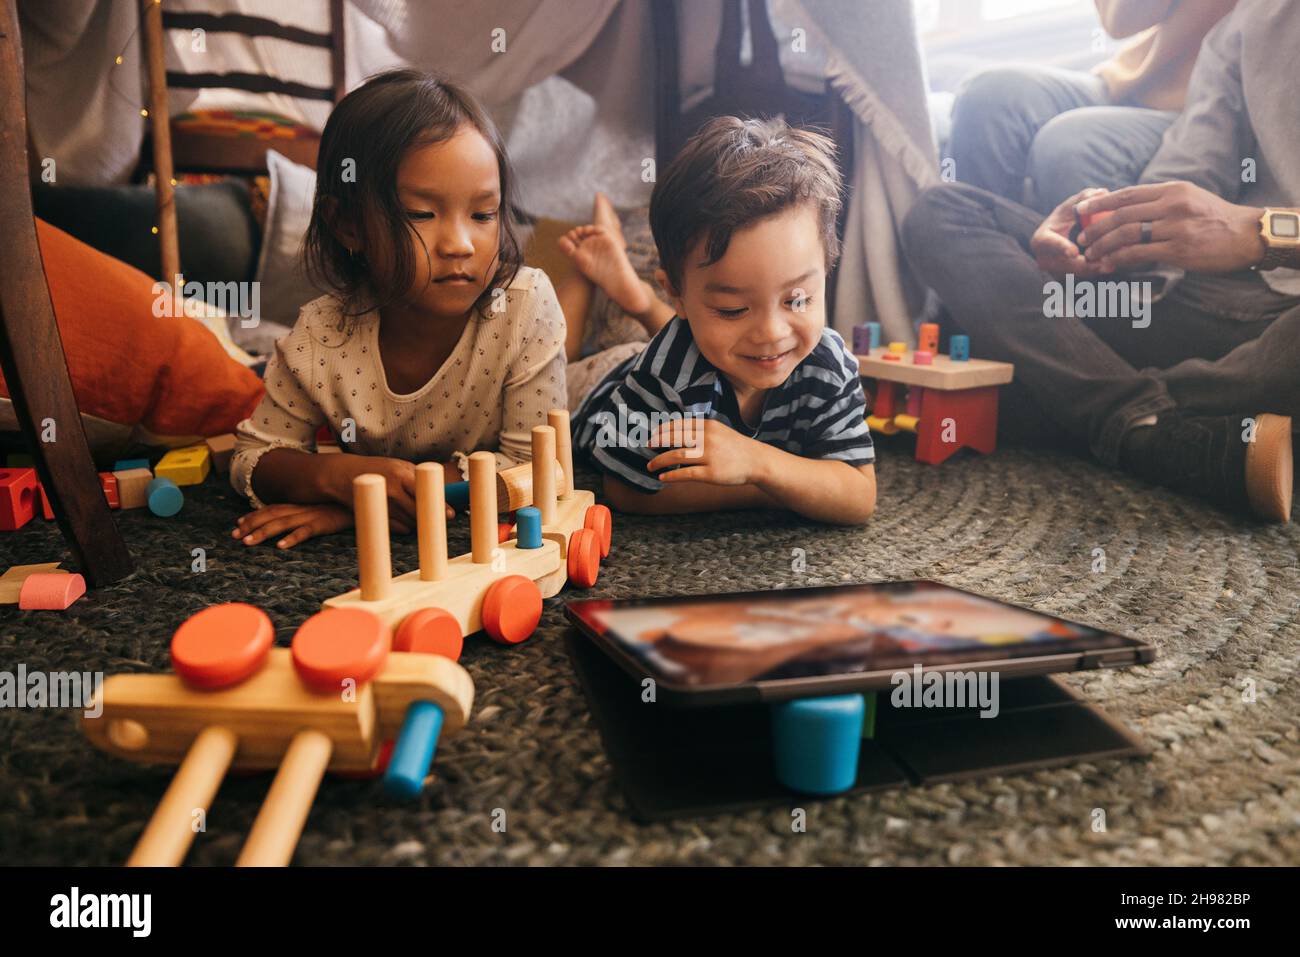 Young siblings watching kids content on a digital tablet. Two adorable toddlers lying on the floor with their parents sitting in the background. Sibli Stock Photo